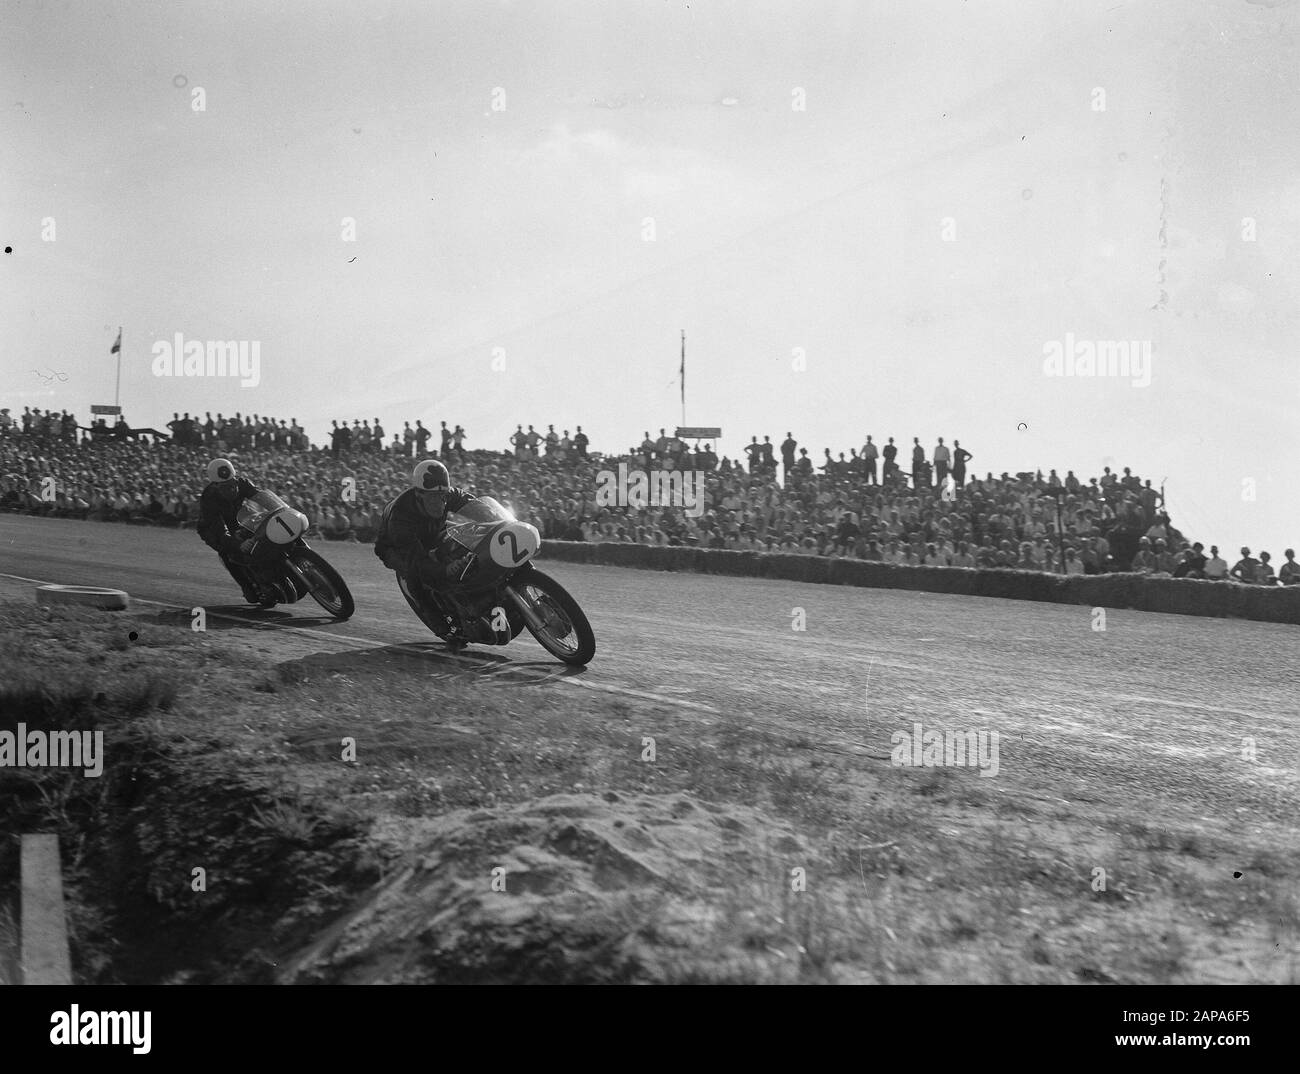 TT Assen 1955 Description: Drivers in the turn Annotation: 500cc Reg Armstrong (2), Geoff Duke (1) Date: 16 July 1955 Location: Axis Keywords: Motorsport Institution name: TT Stock Photo